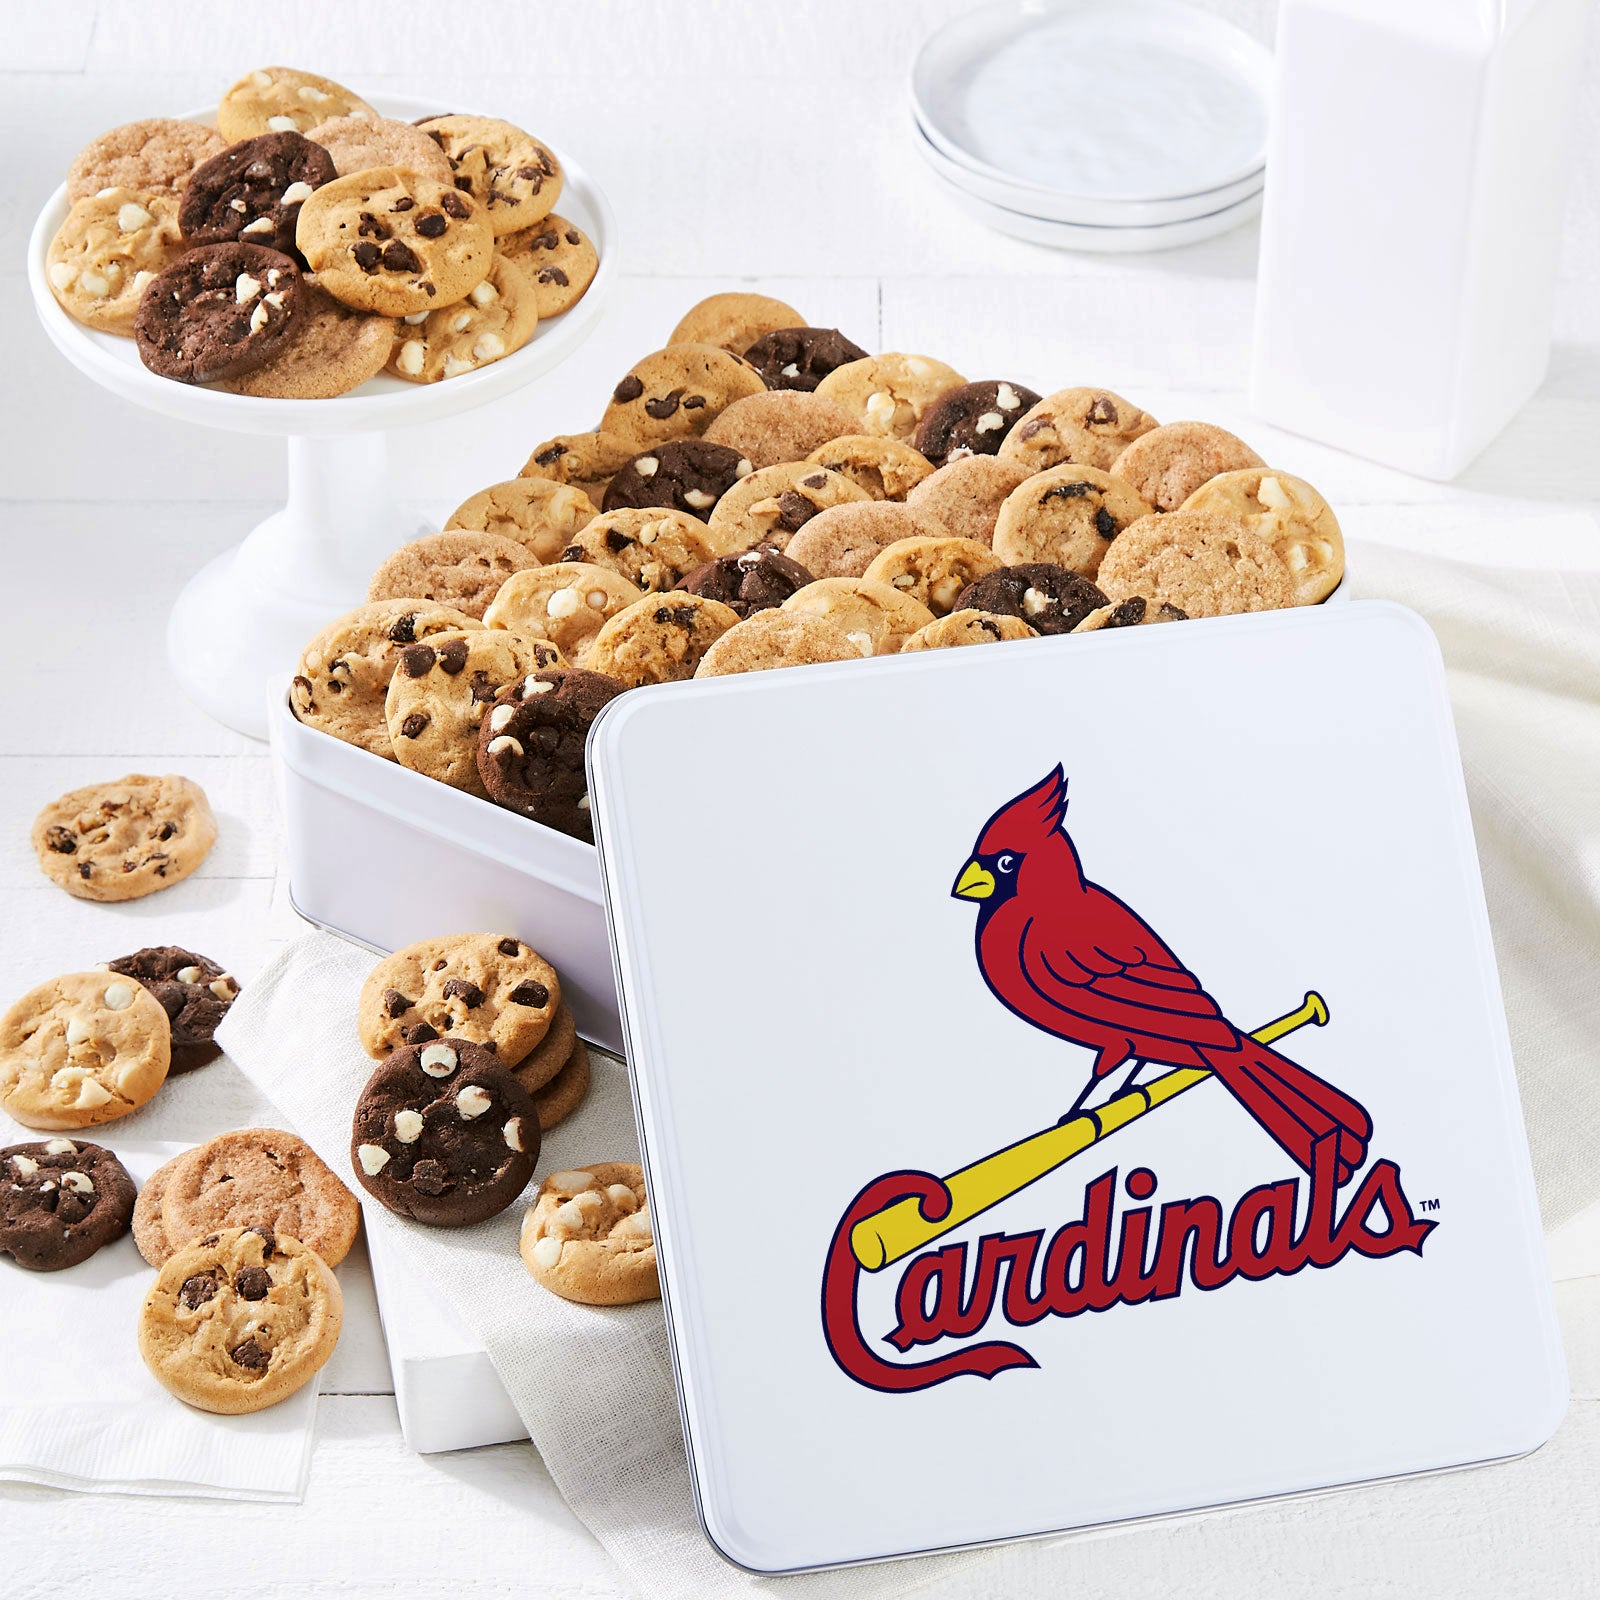 The best St. Louis Cardinals gifts for fans this Christmas season